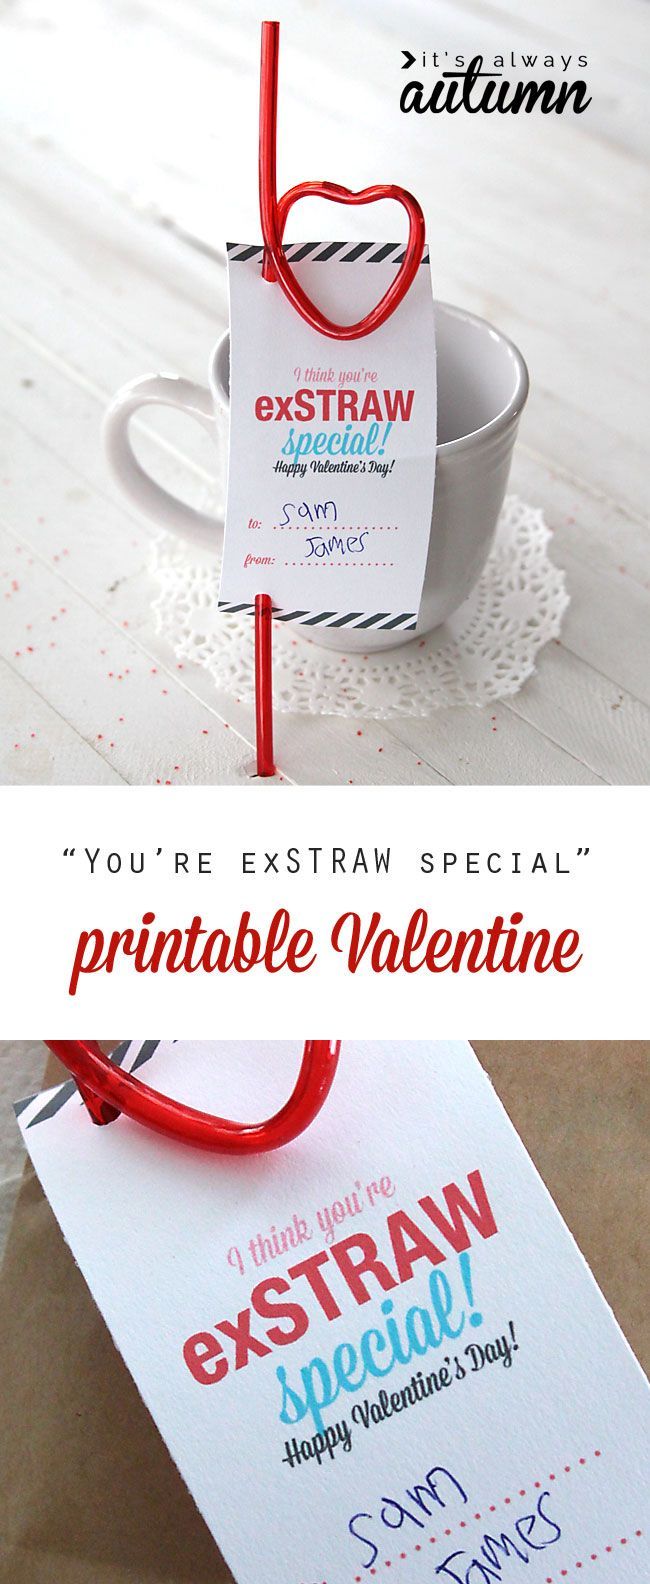 I love this Valentine’s Day card printable! It’s cute, cheap (straws are from the dollar store) and a great alternative to candy!